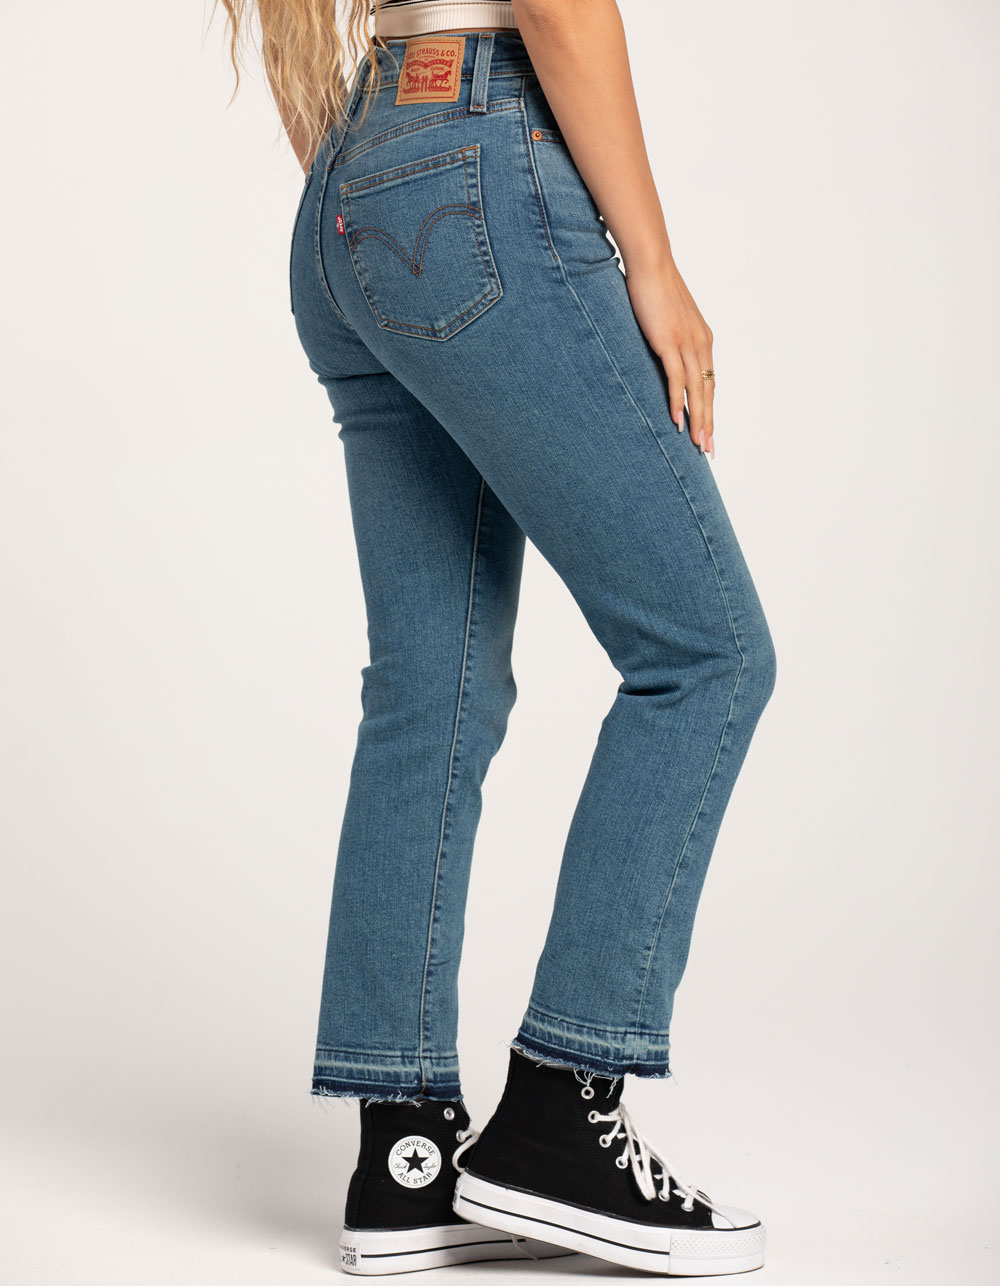 LEVI'S Wedgie Straight Womens Jeans - Turned On Me